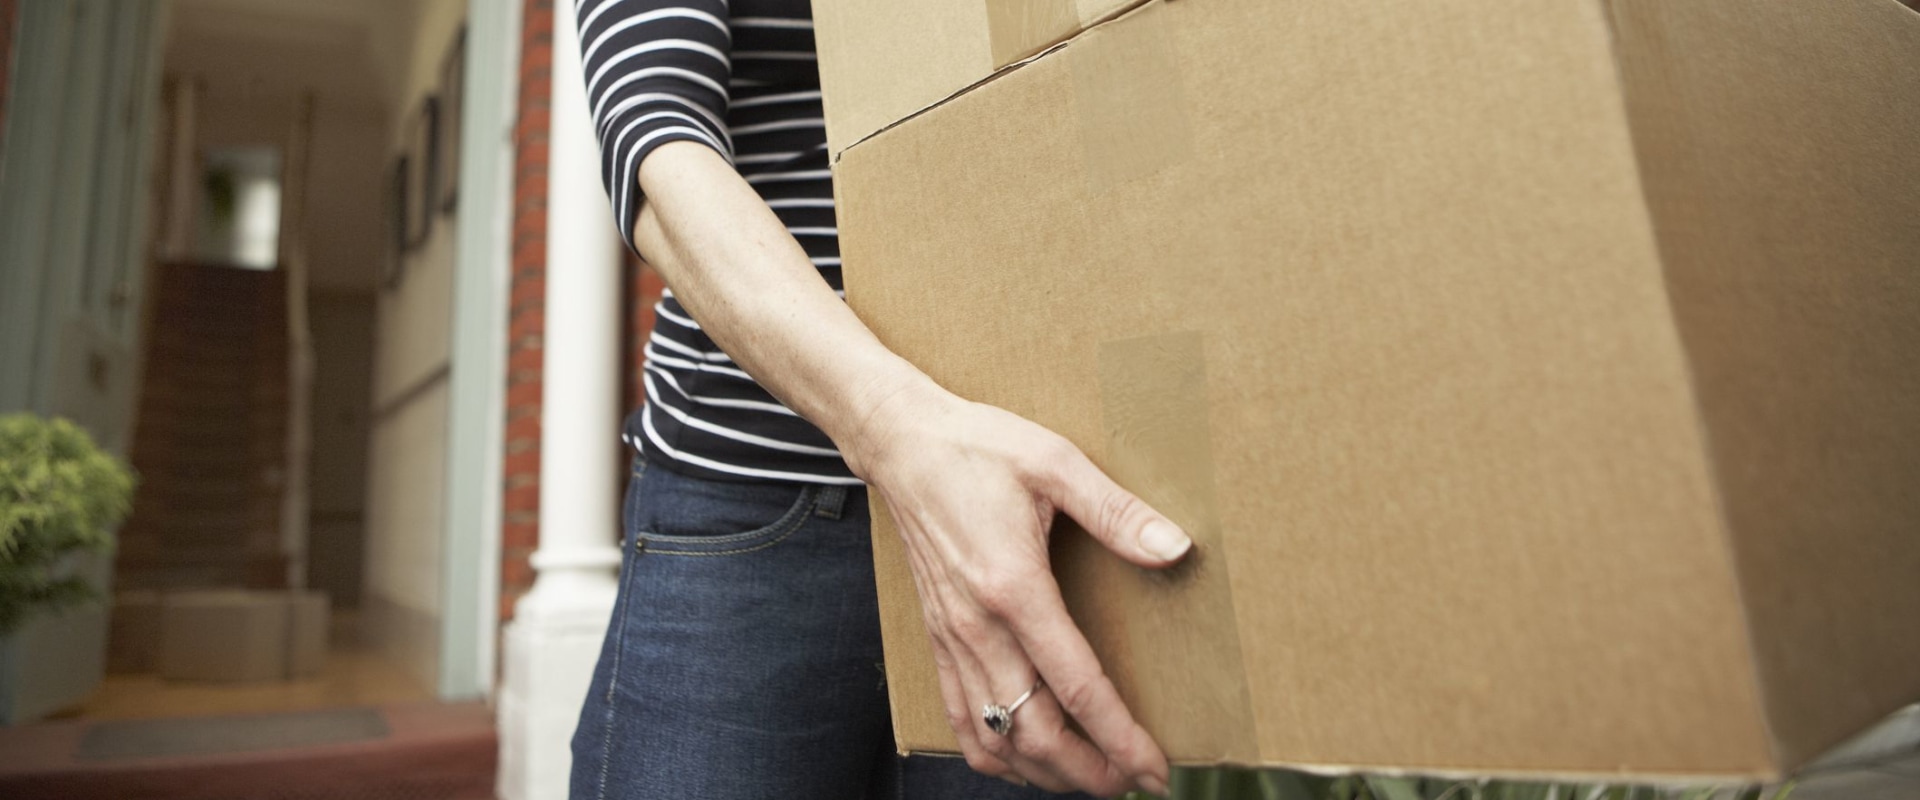 When is the Best Time to Move House? - An Expert's Guide